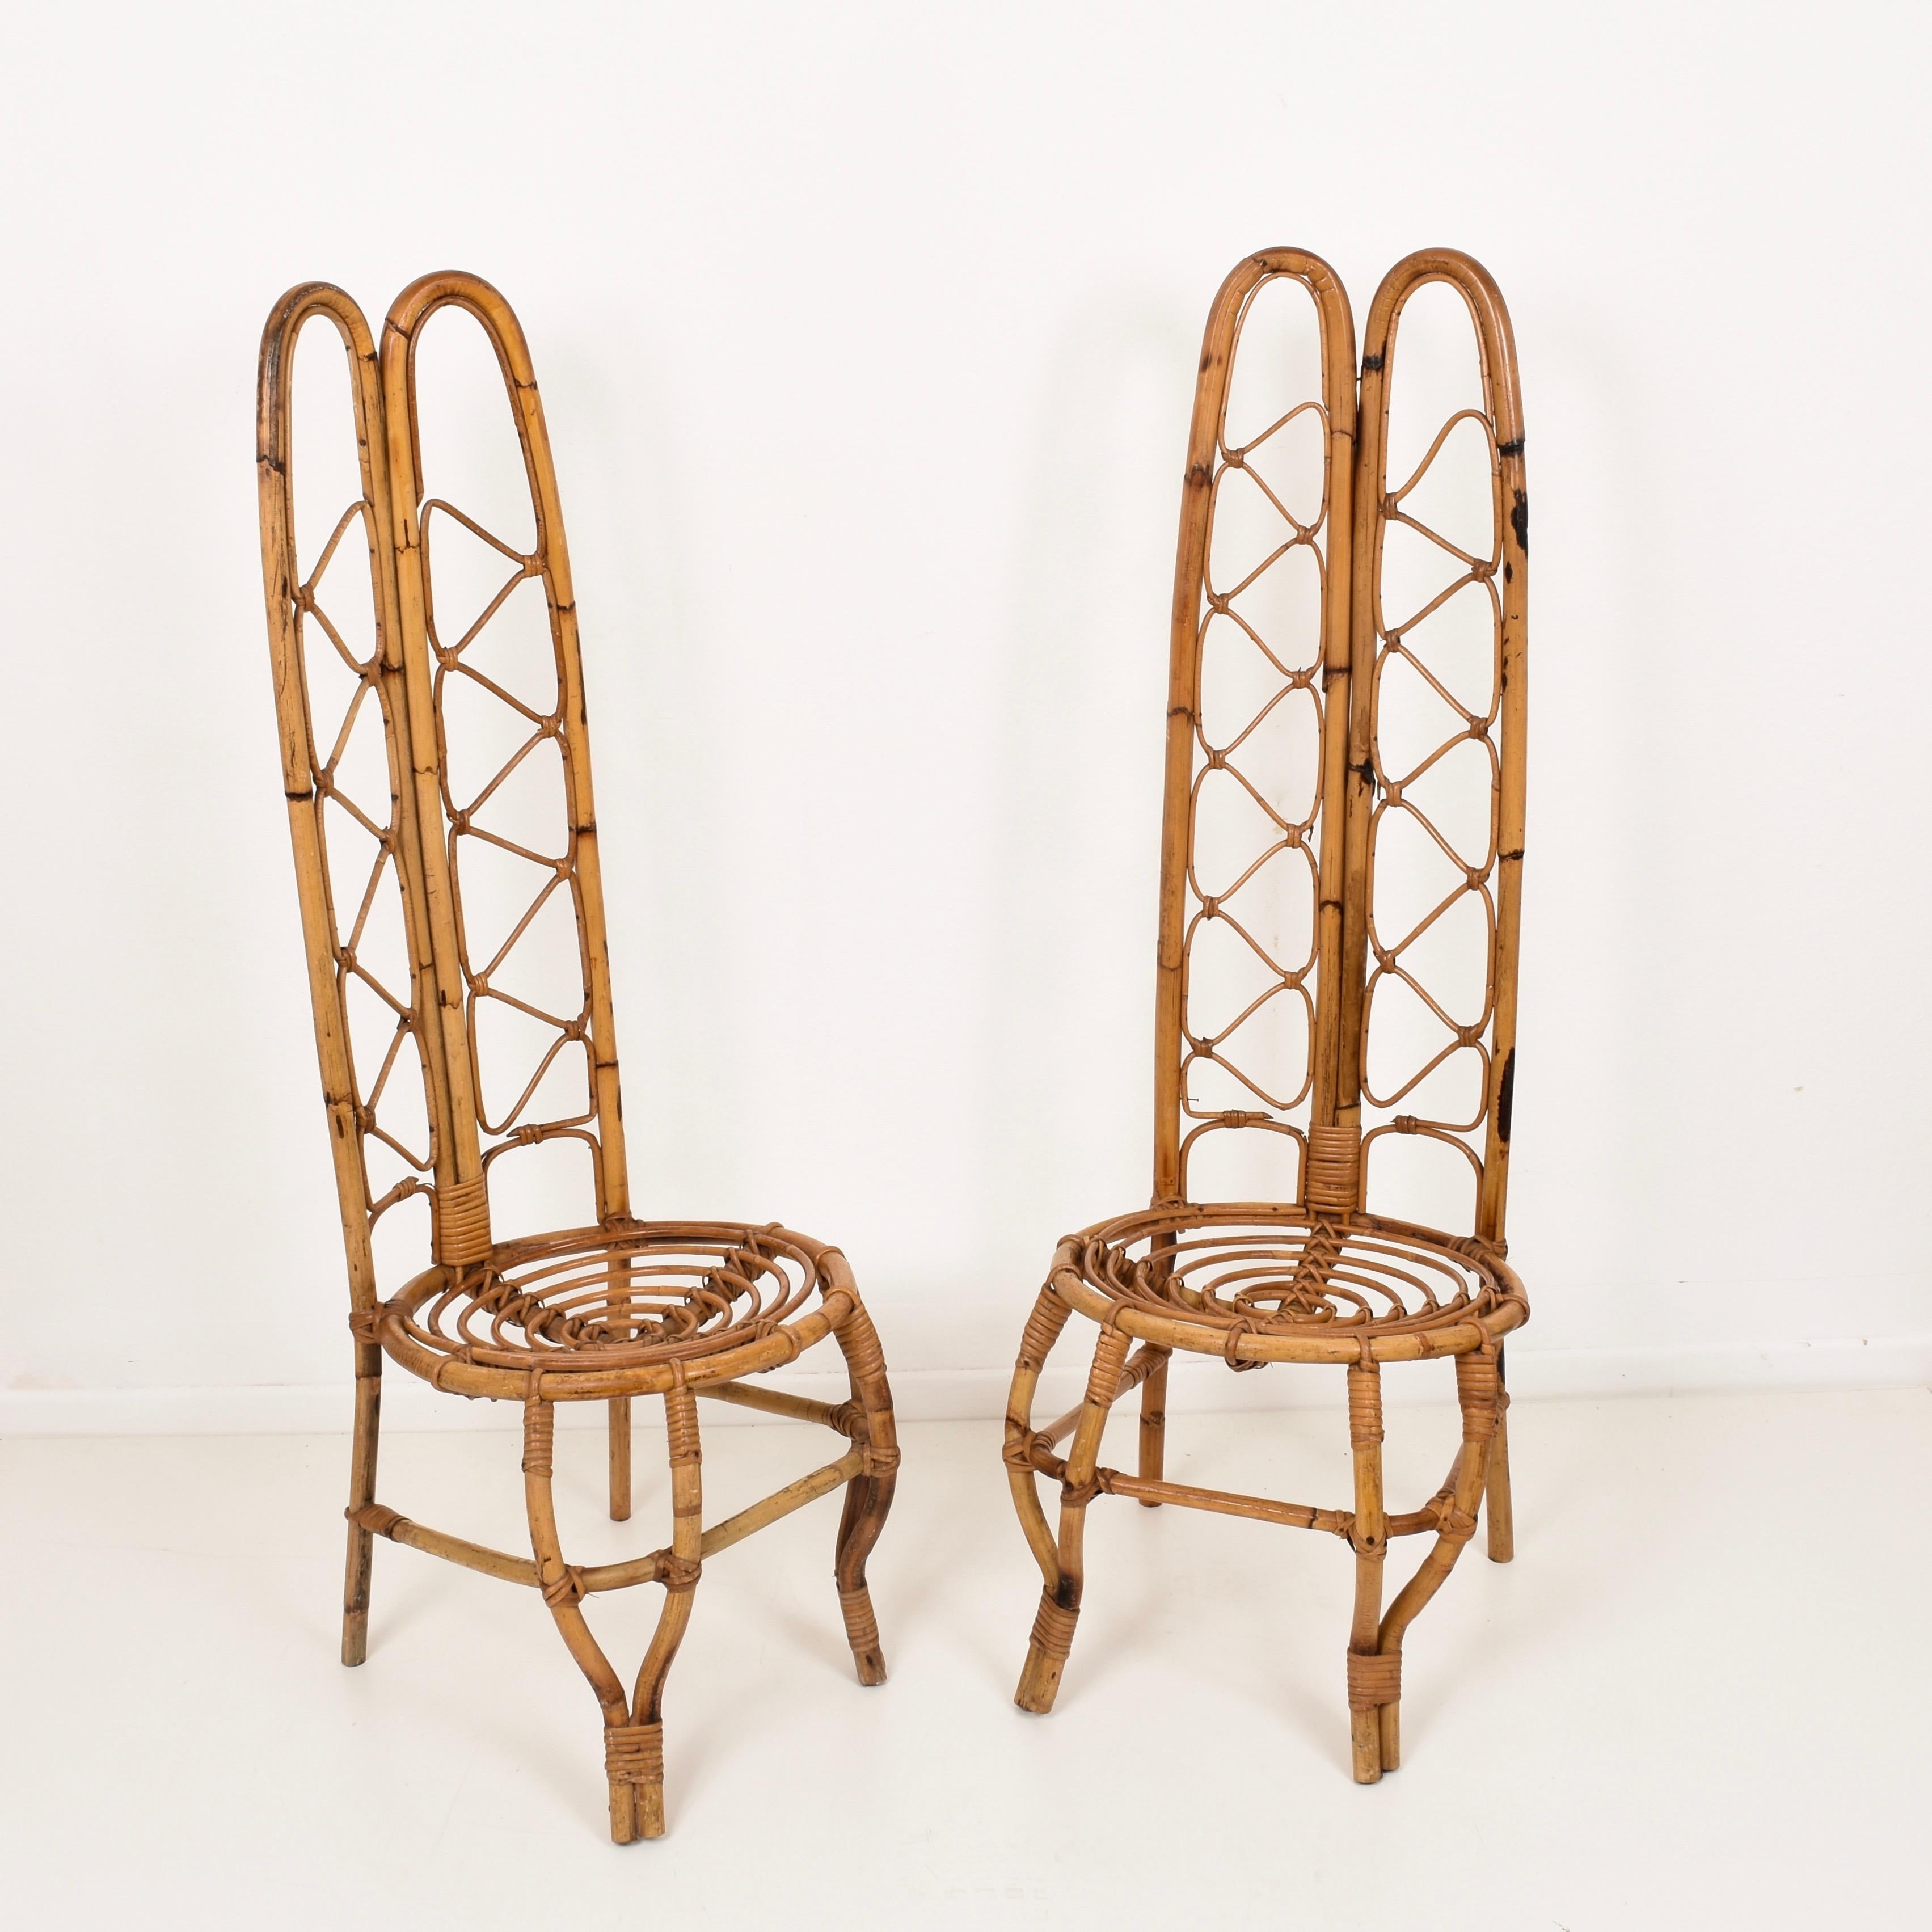 20th Century Pair of Midcentury French Riviera Rattan and Bamboo Chairs, France, 1960s